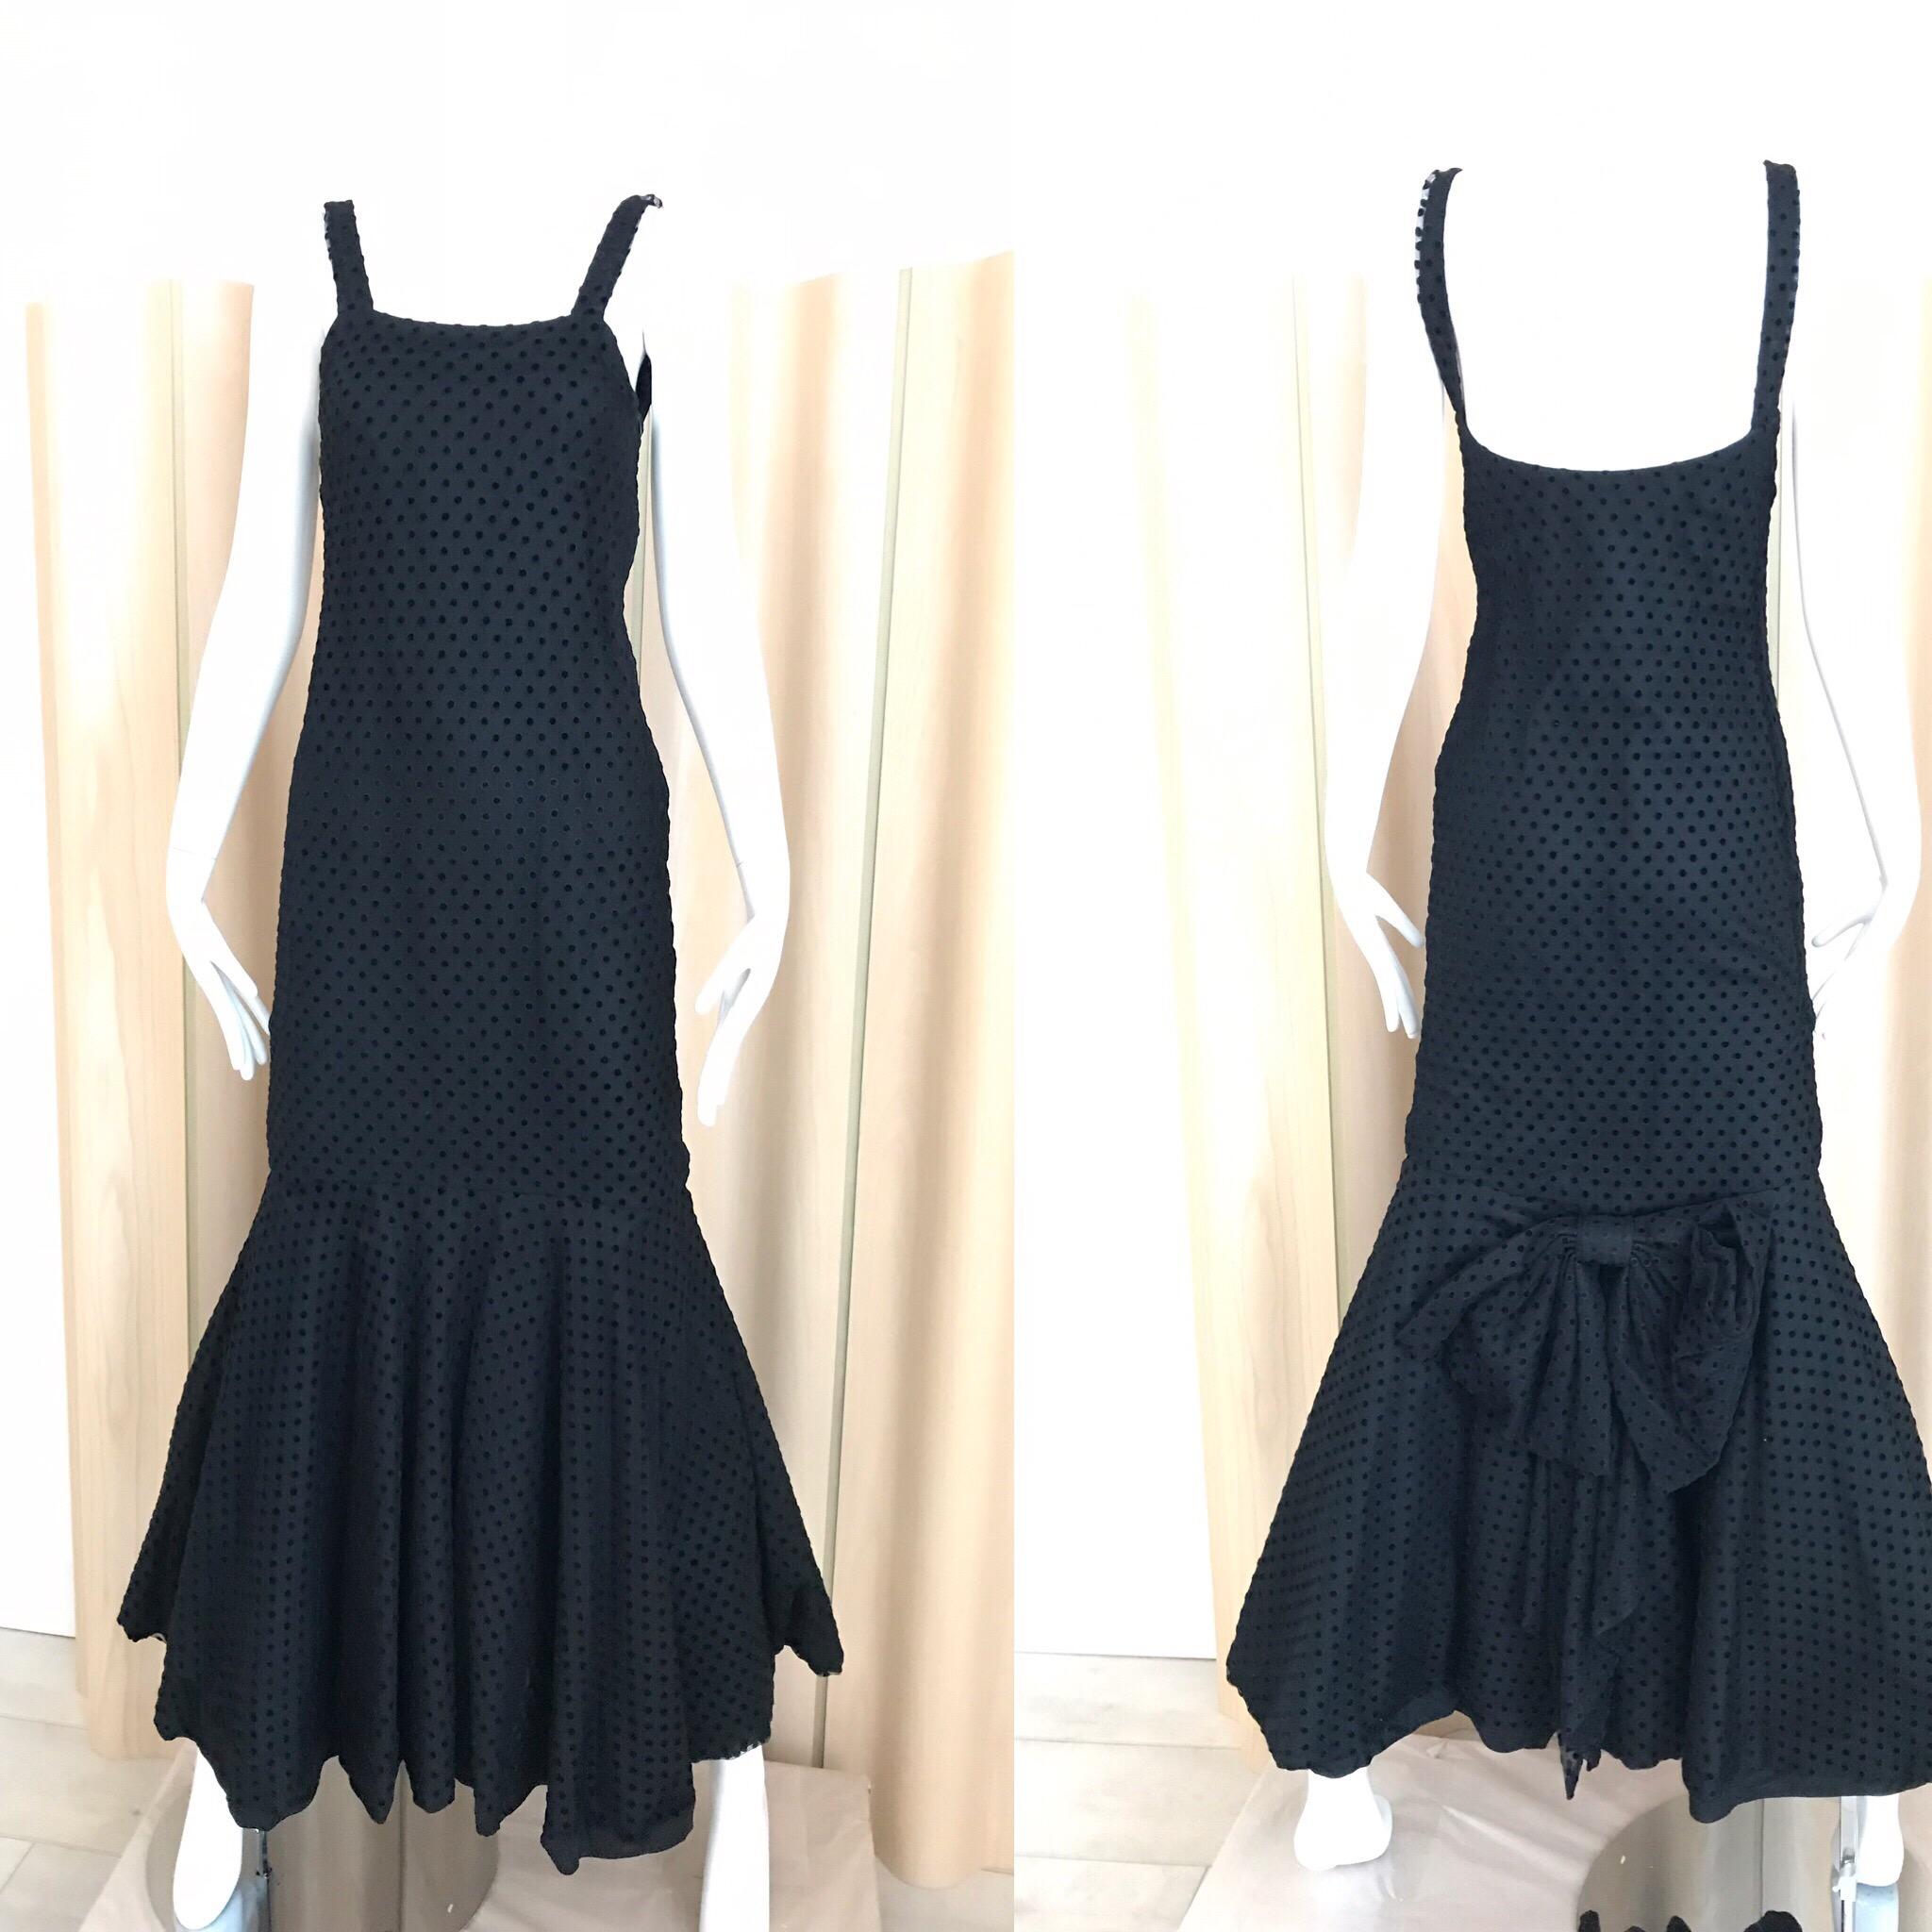 Elegant 1980s Christian Dior Black net dress with velvet polka dot spaghetti strap gown. Perfect for cocktail party or Black tie event.
Size 4/ Small
Bust: 34 inches/ Hip 34 inches